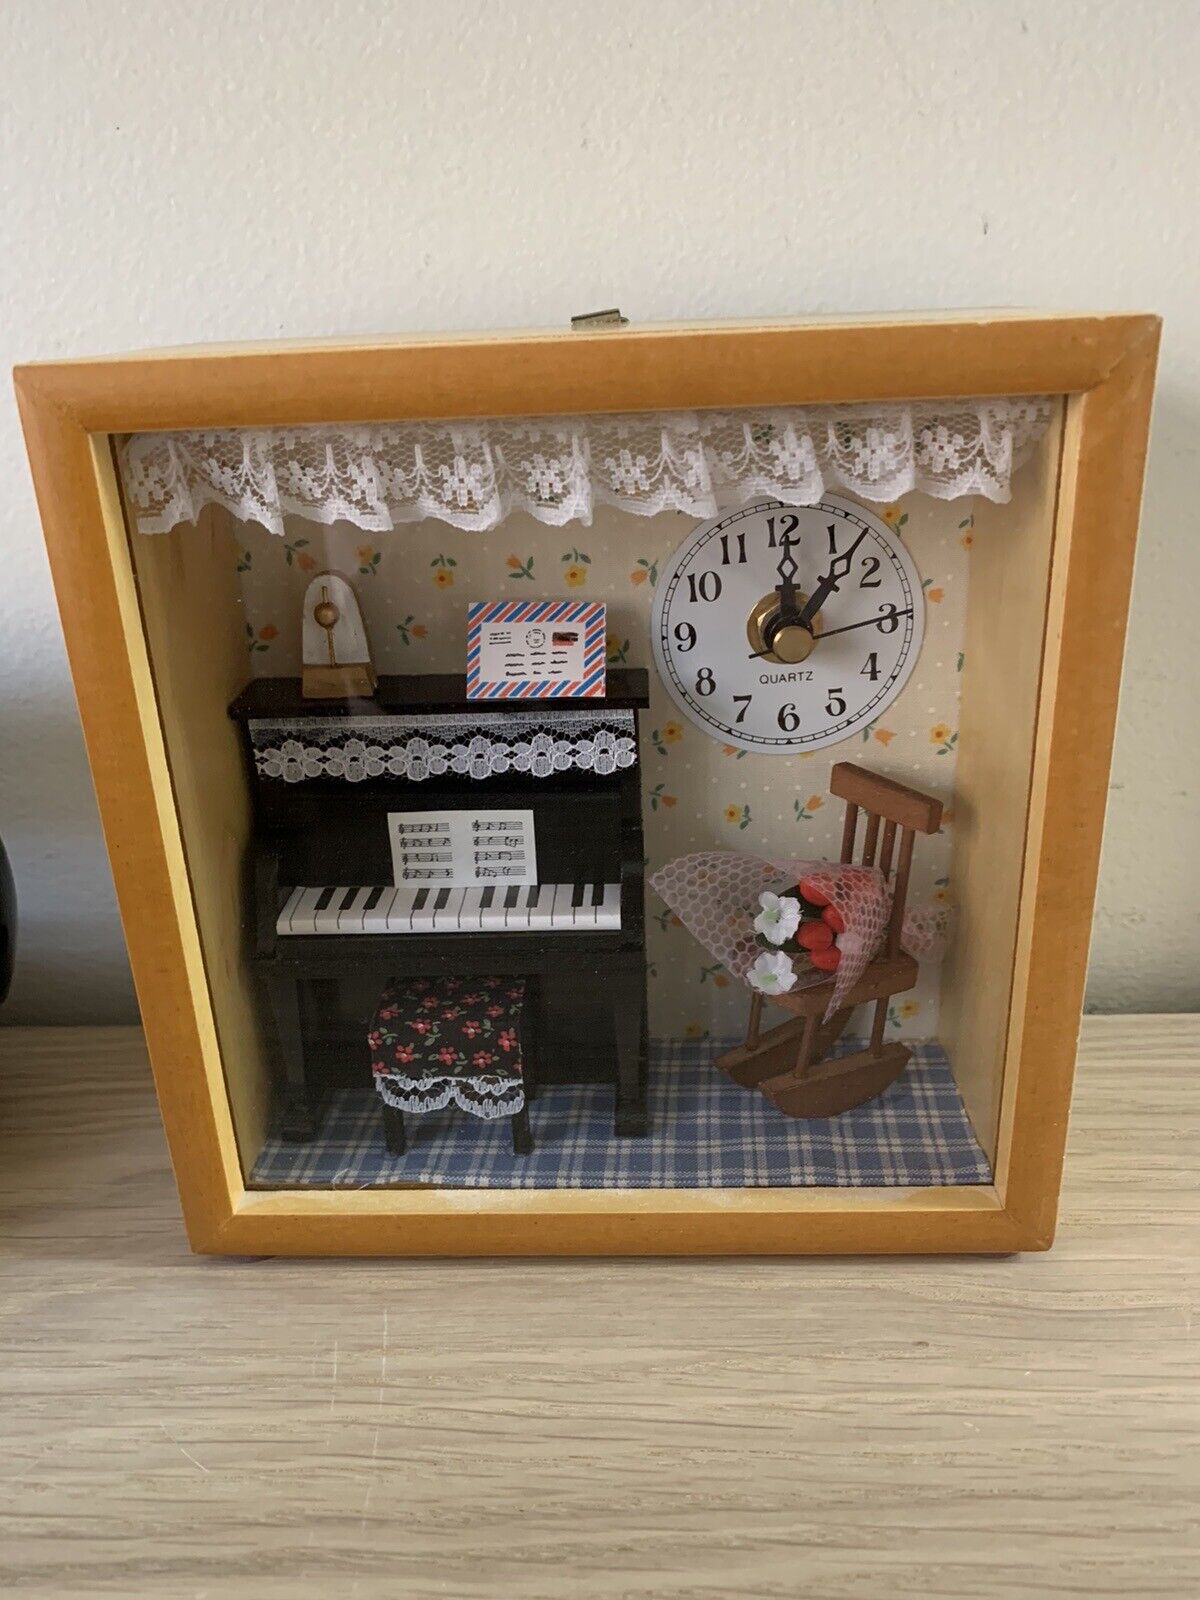 Vintage Piano Portrait With Working Clock Inside